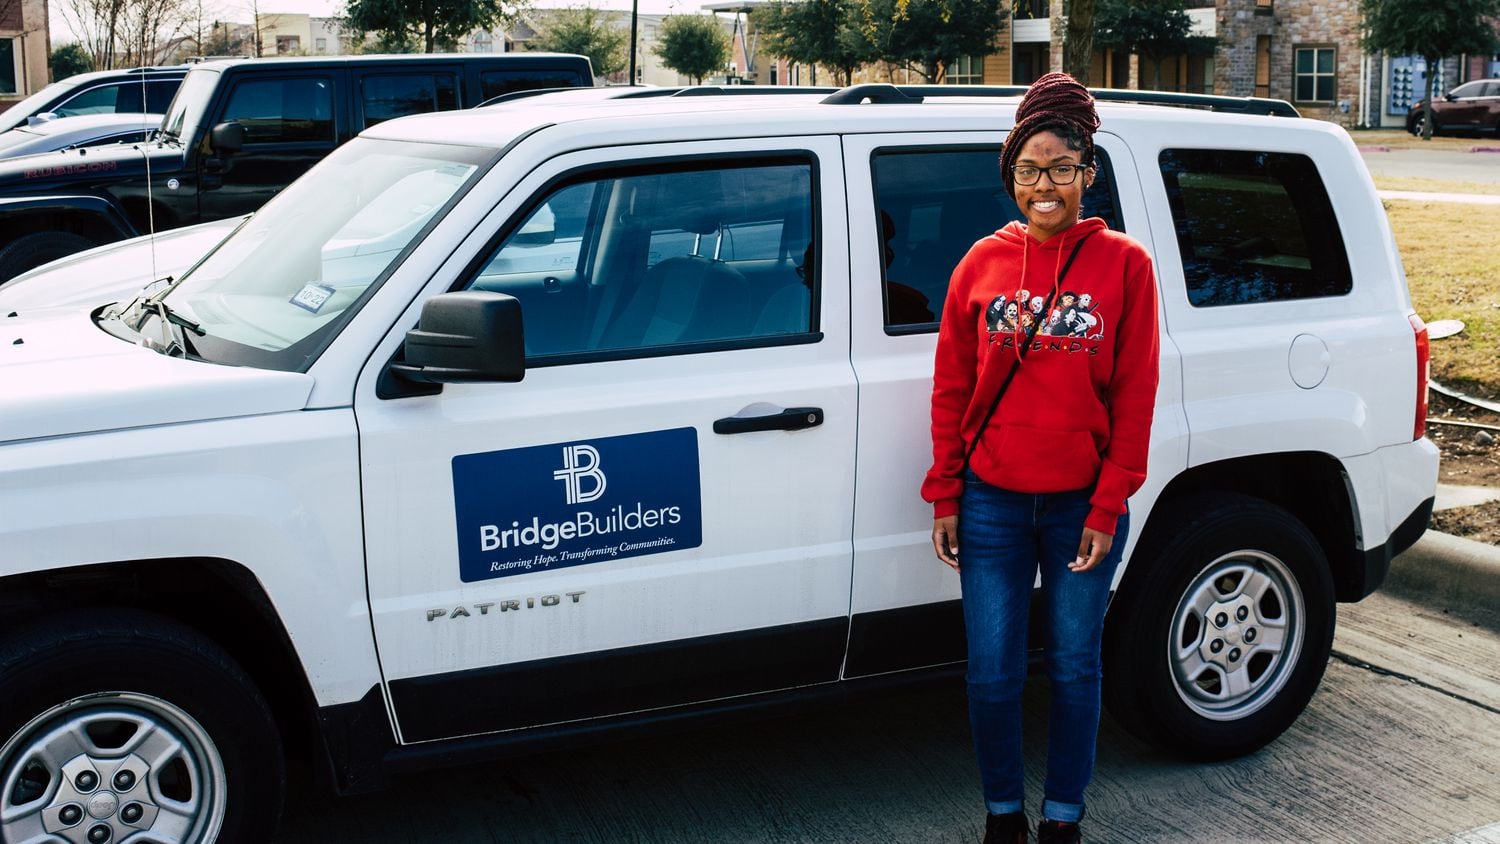 Teen stands next to white SUV with a BridgeBuilders label on it.